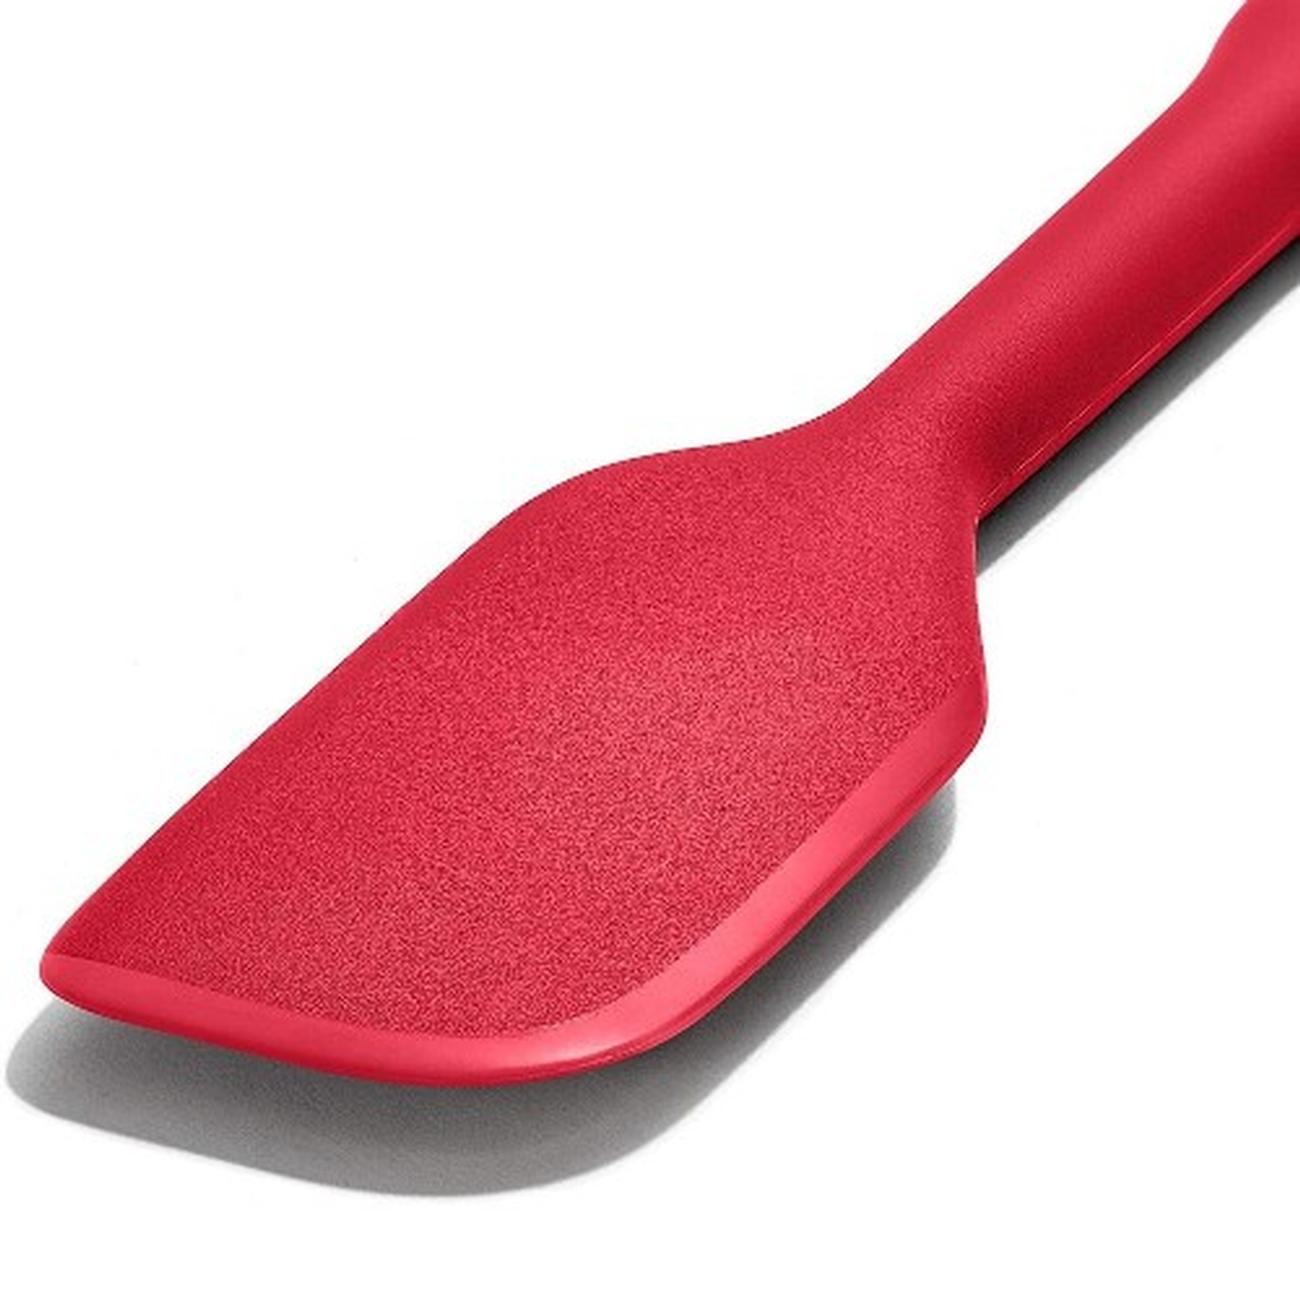 https://www.thekitchenwhisk.ie/contentfiles/productImages/Large/Good-Grips-Silicone-Small-Spatula-Jam-OXO-1.jpg